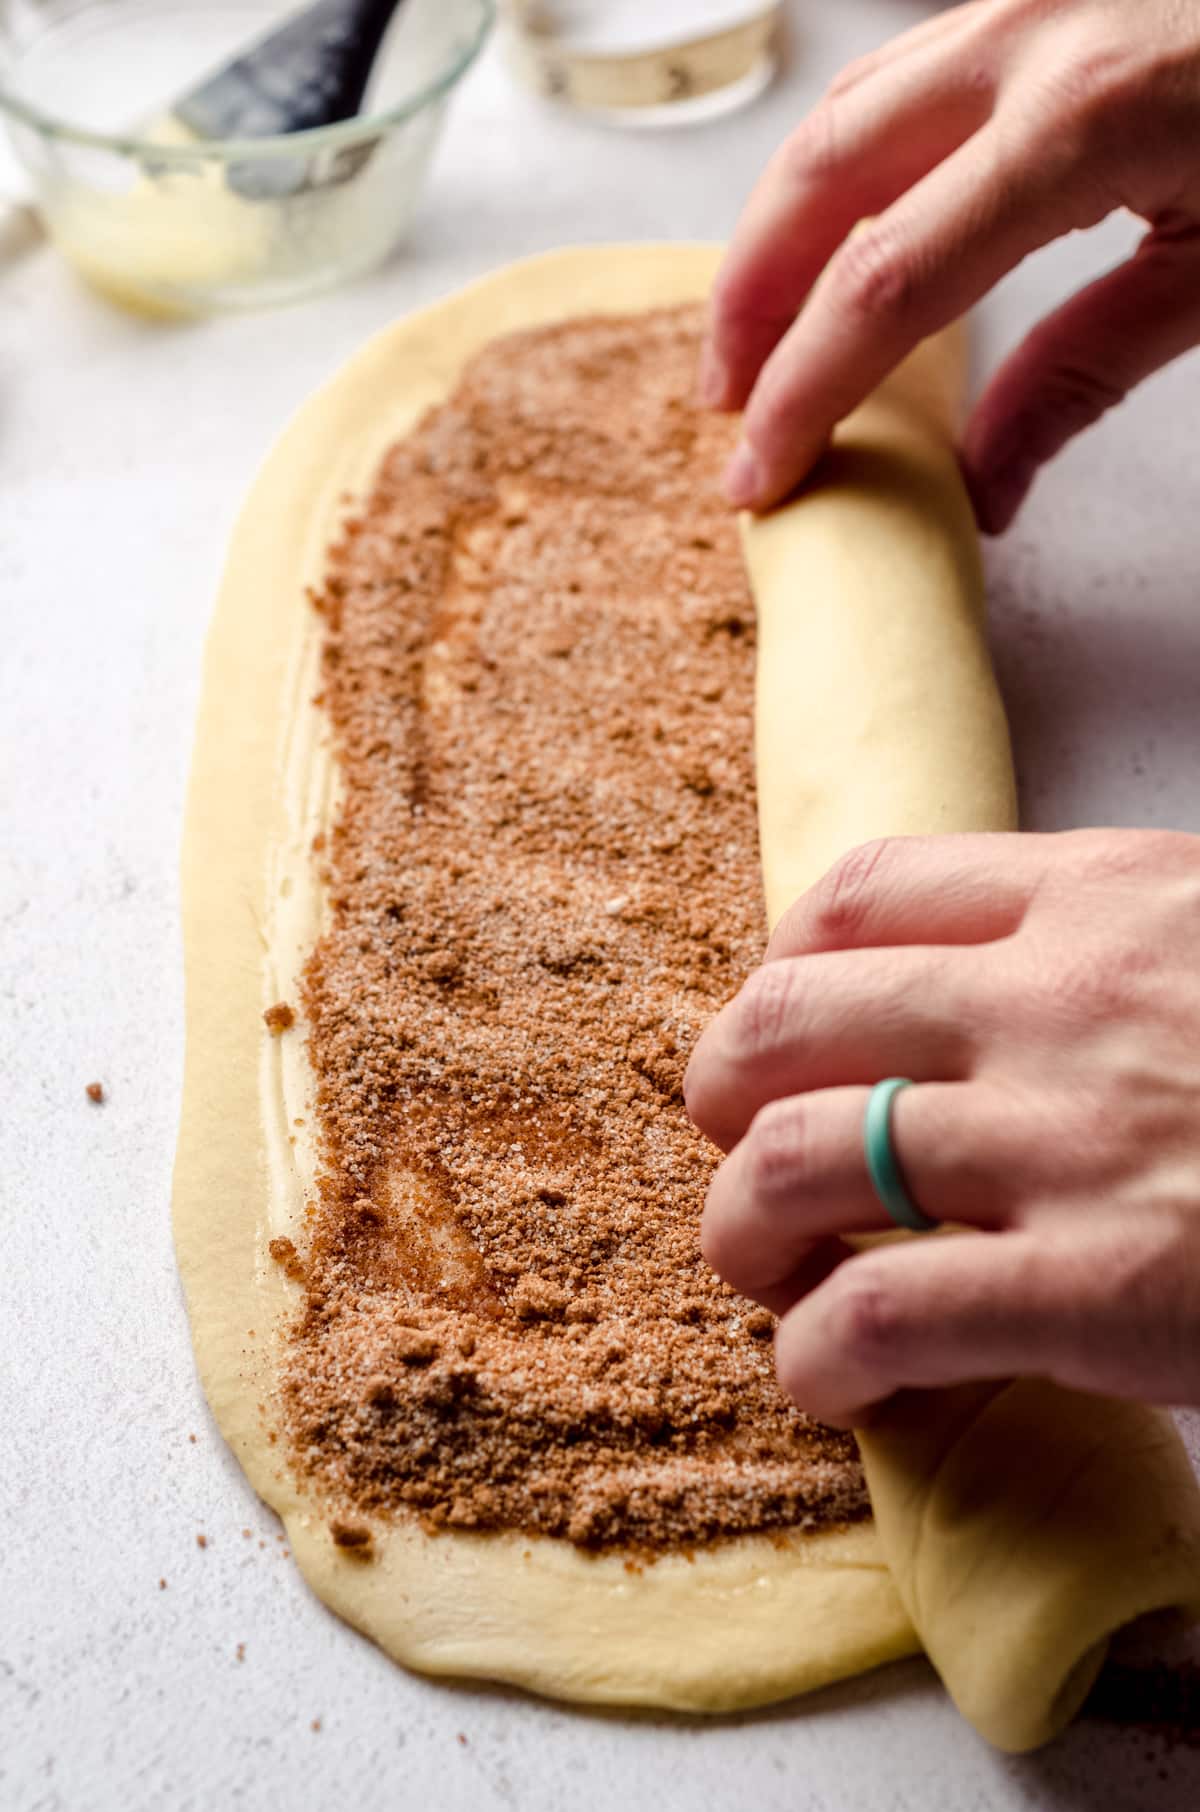 Hands rolling up a log of cinnamon roll dough.